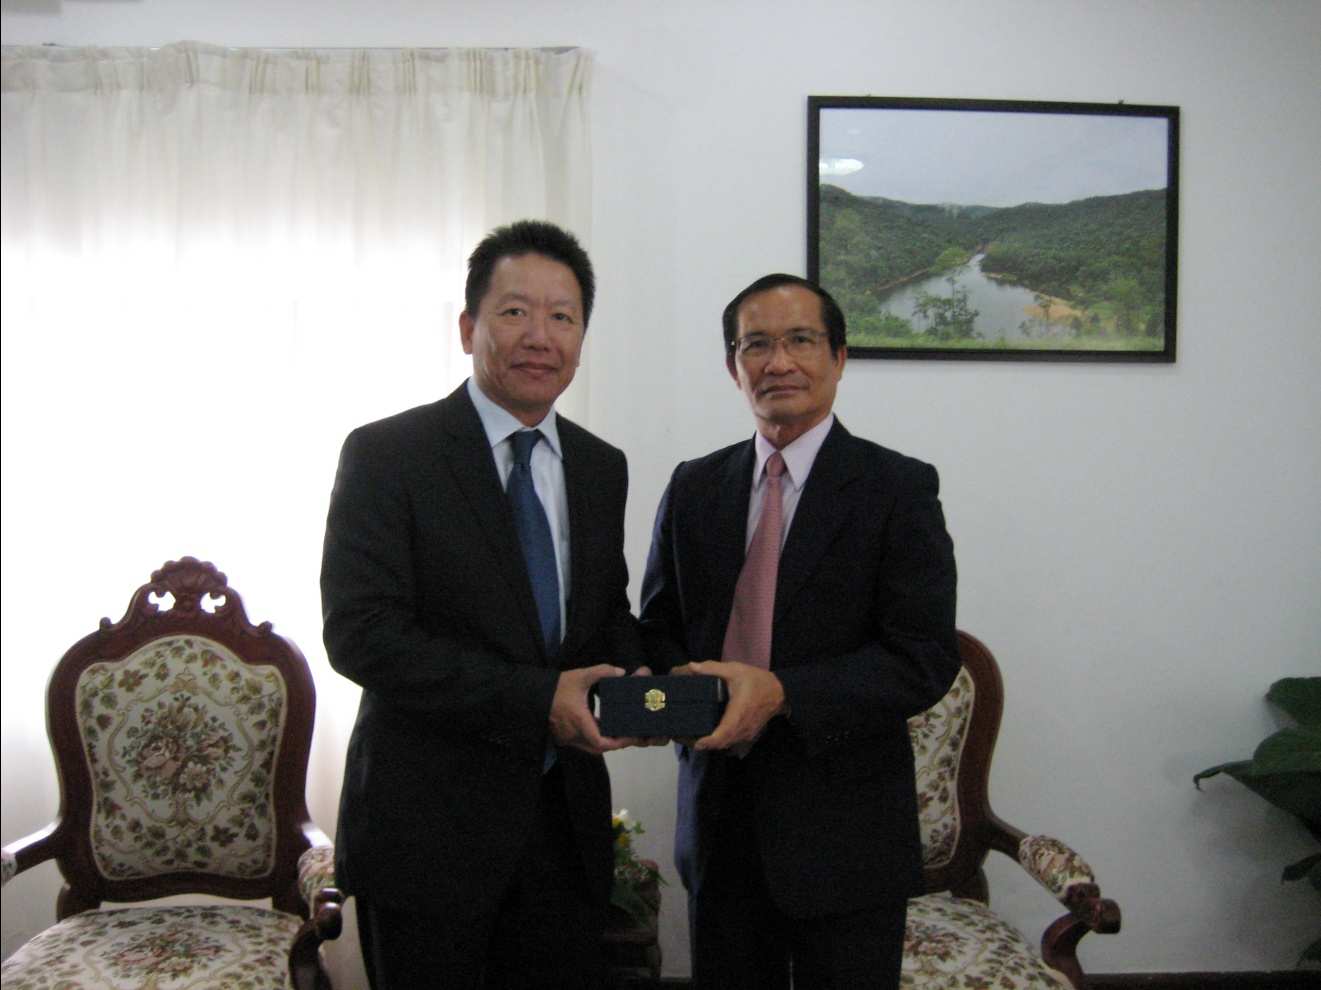 EXIM Thailand Visits Lao PDR’s Minister of Natural Resources and Environment